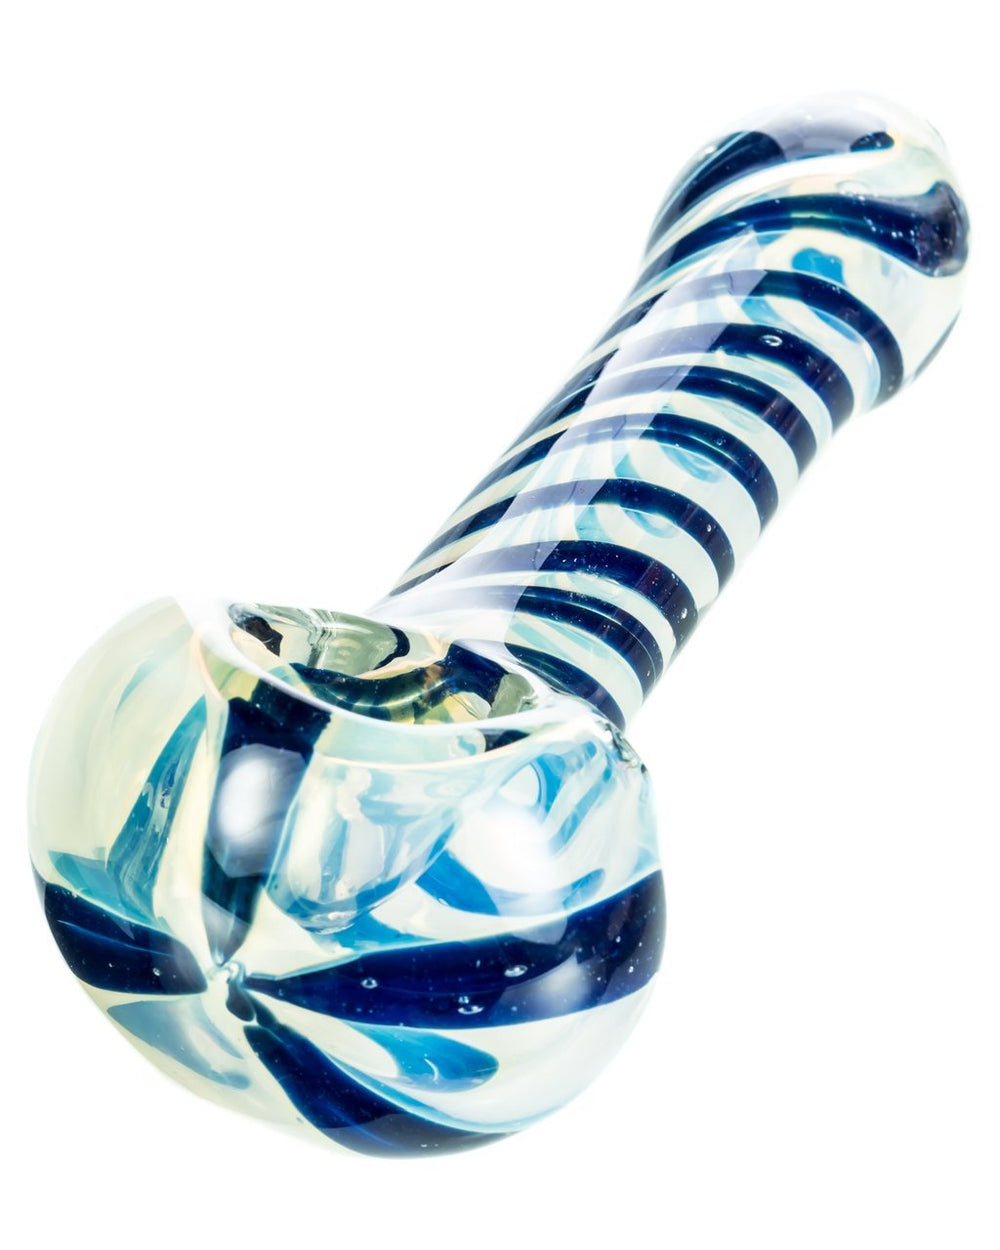 Spoon Pipes Swirled Fumed Hand Pipe